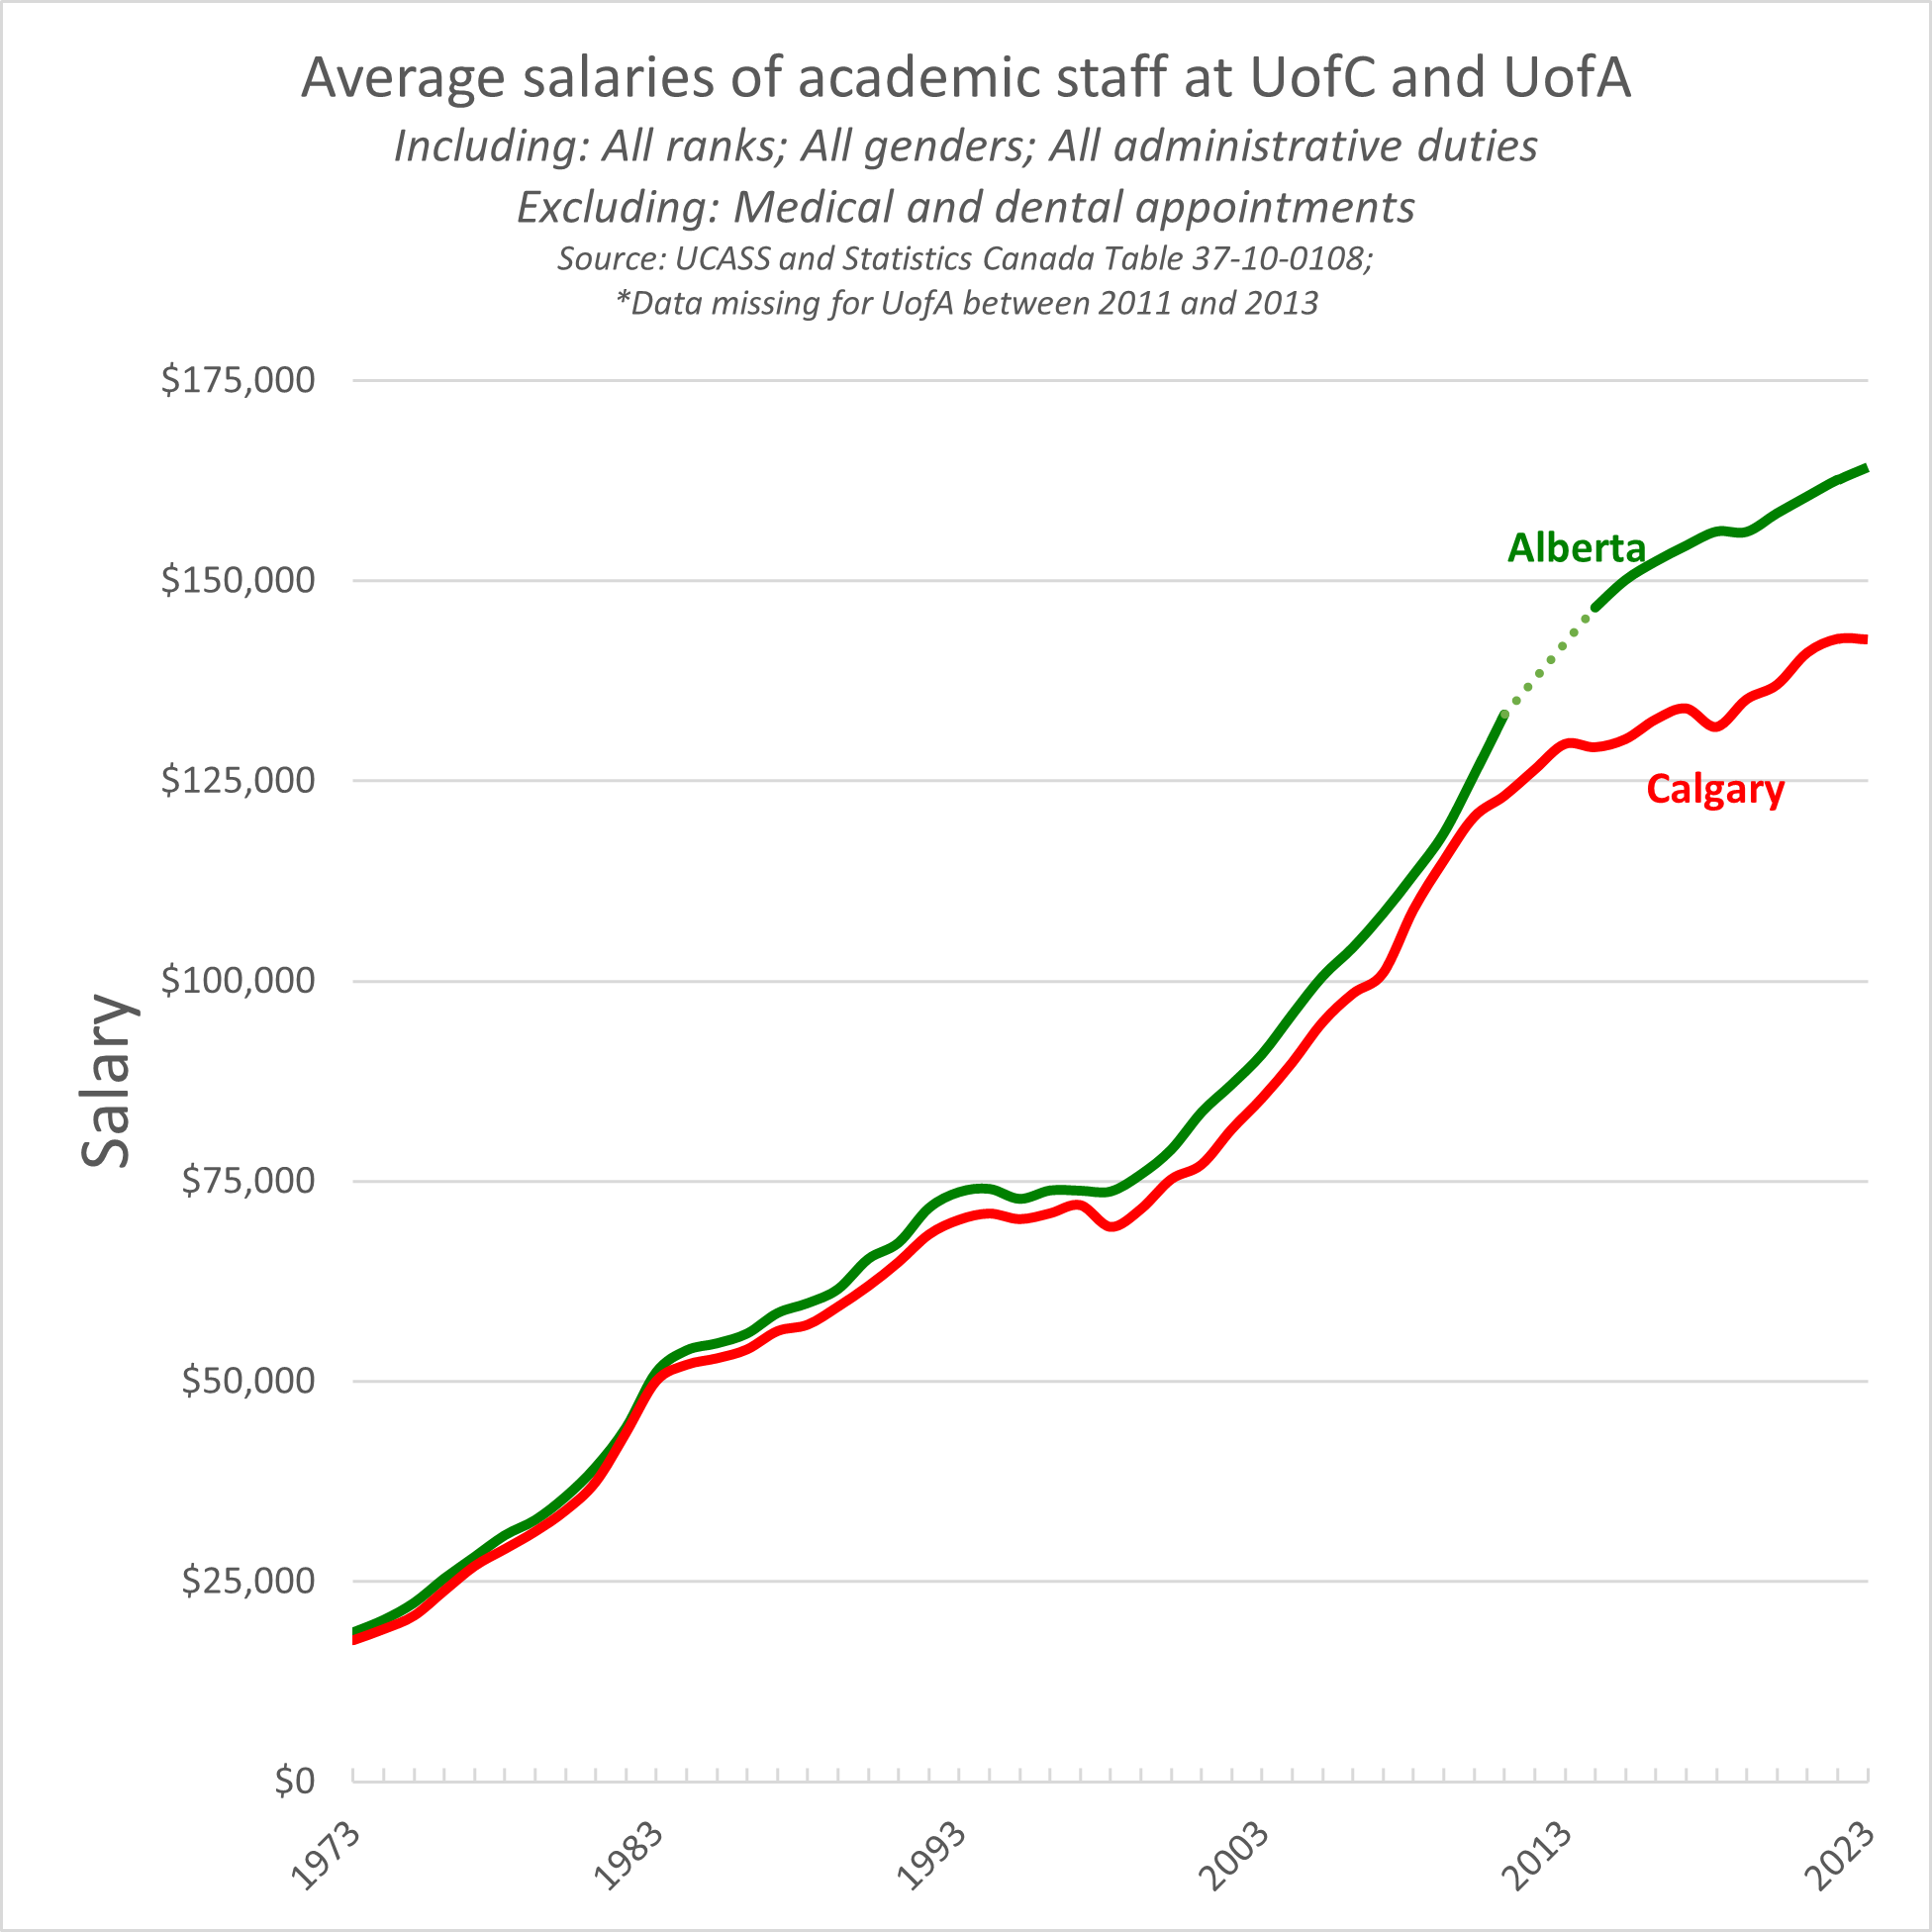 Line chart comparing the average salaries of full-time academic staff at the Universisty of Calgary with the University of Alberta between 1973 and 2023. The averages include all ranks, all genders, all administrative duties, but they exclude medical and dental appointments. The chart shows that the salaries have diverged significantly over the past 20 years with the University of Alberta having higher average salary than the University of Calgary.